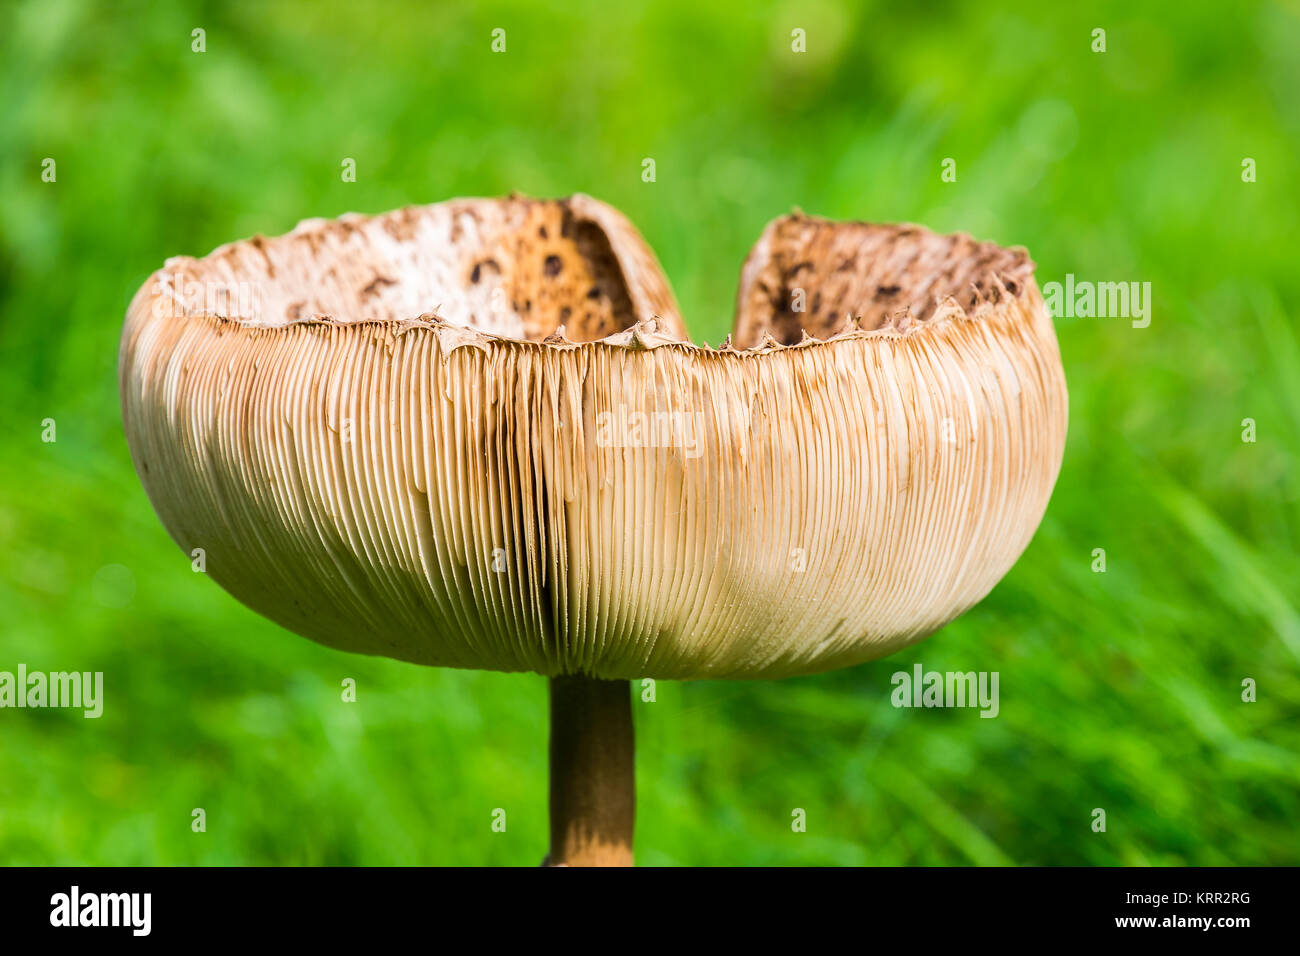 close up of brown mushroom in green grass Stock Photo